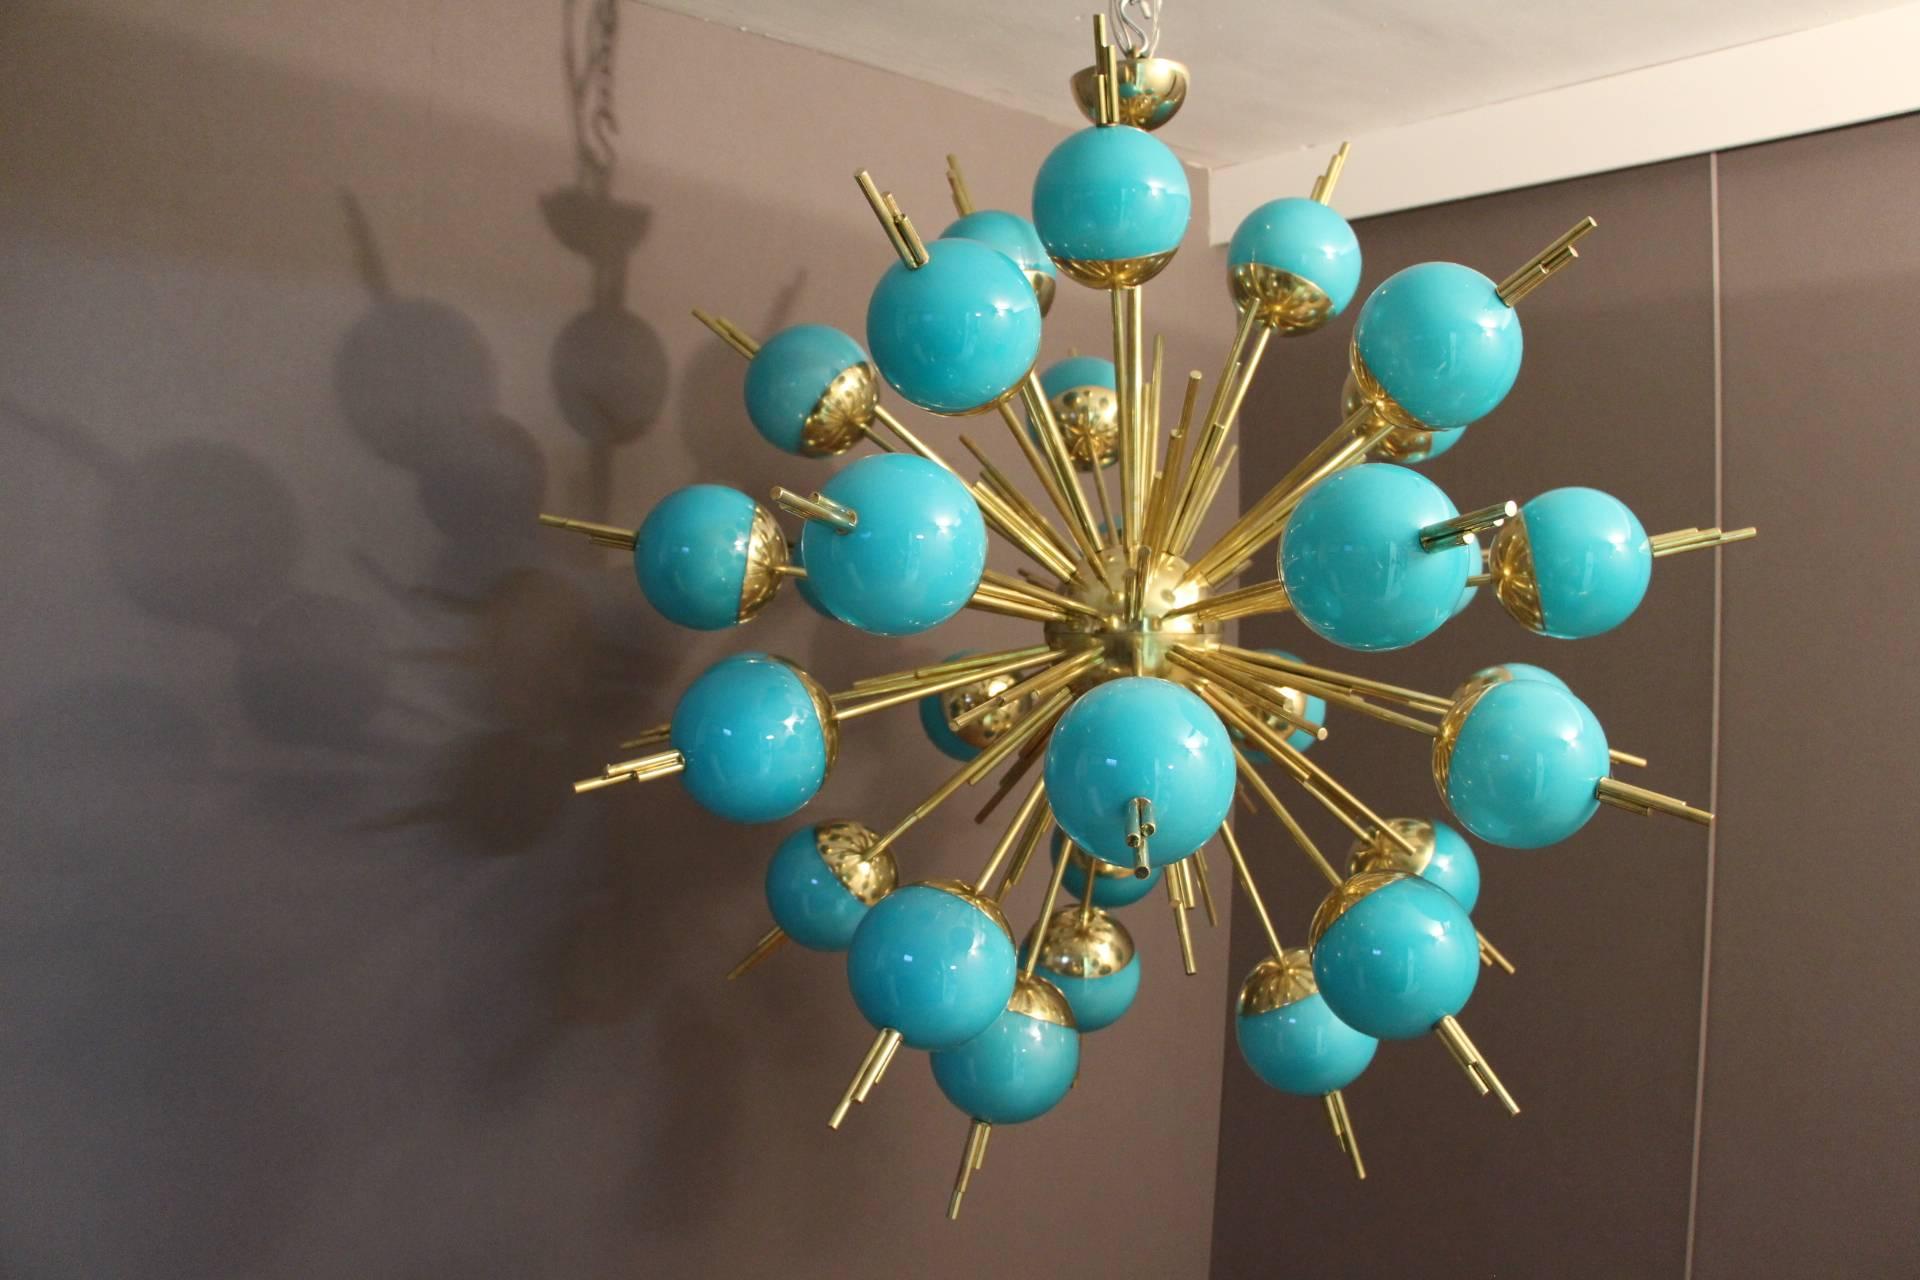 This very unusual Sputnik chandelier features 30 turquoise glass globes mounted on brass rods.
When the light is on, its turquoise globes turn to light blue color and it is still magnificent.